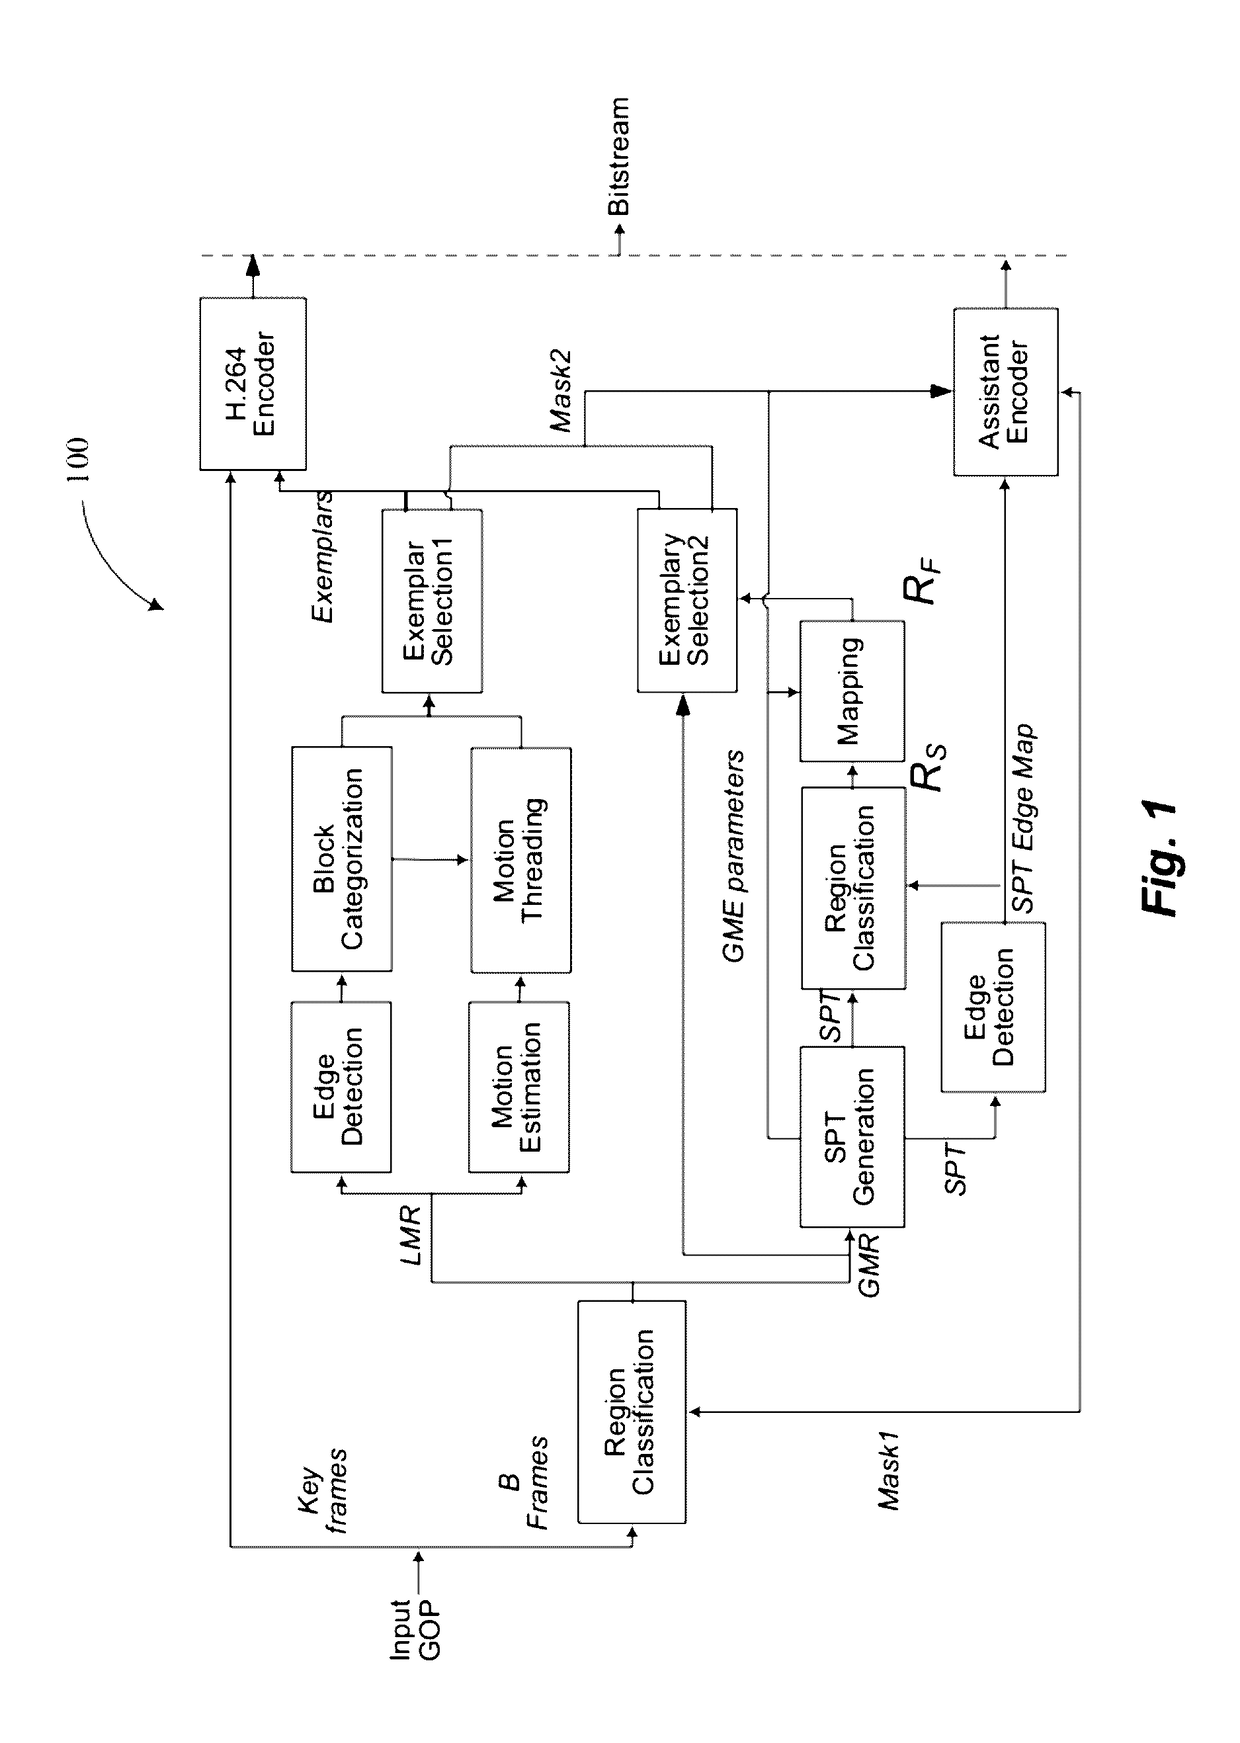 Digital video encoder system, method, and non-transitory computer-readable medium for tracking object regions